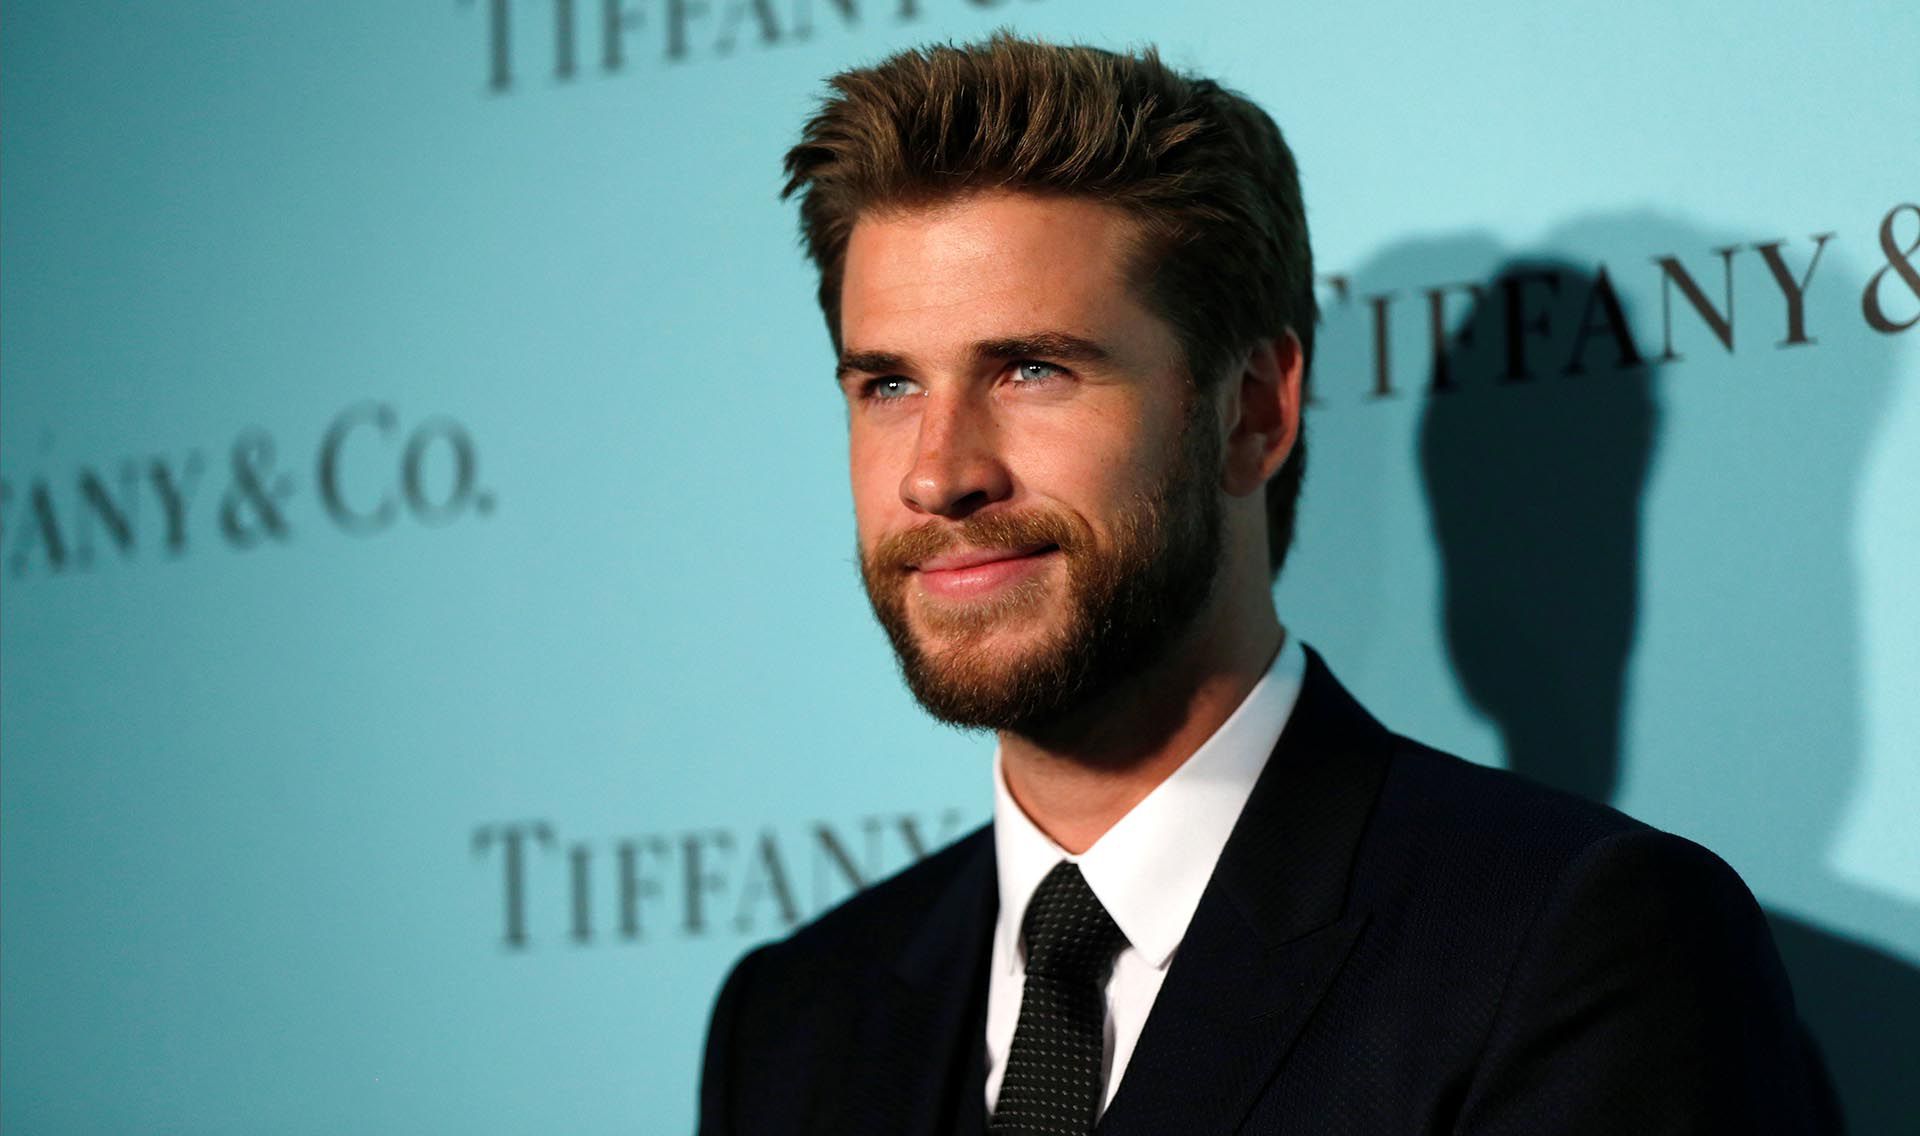 Actor Liam Hemsworth poses at a reception for the re-opening of the Tiffany &amp; Co. store in Beverly Hills, California U.S., October 13, 2016. REUTERS/Mario Anzuoni